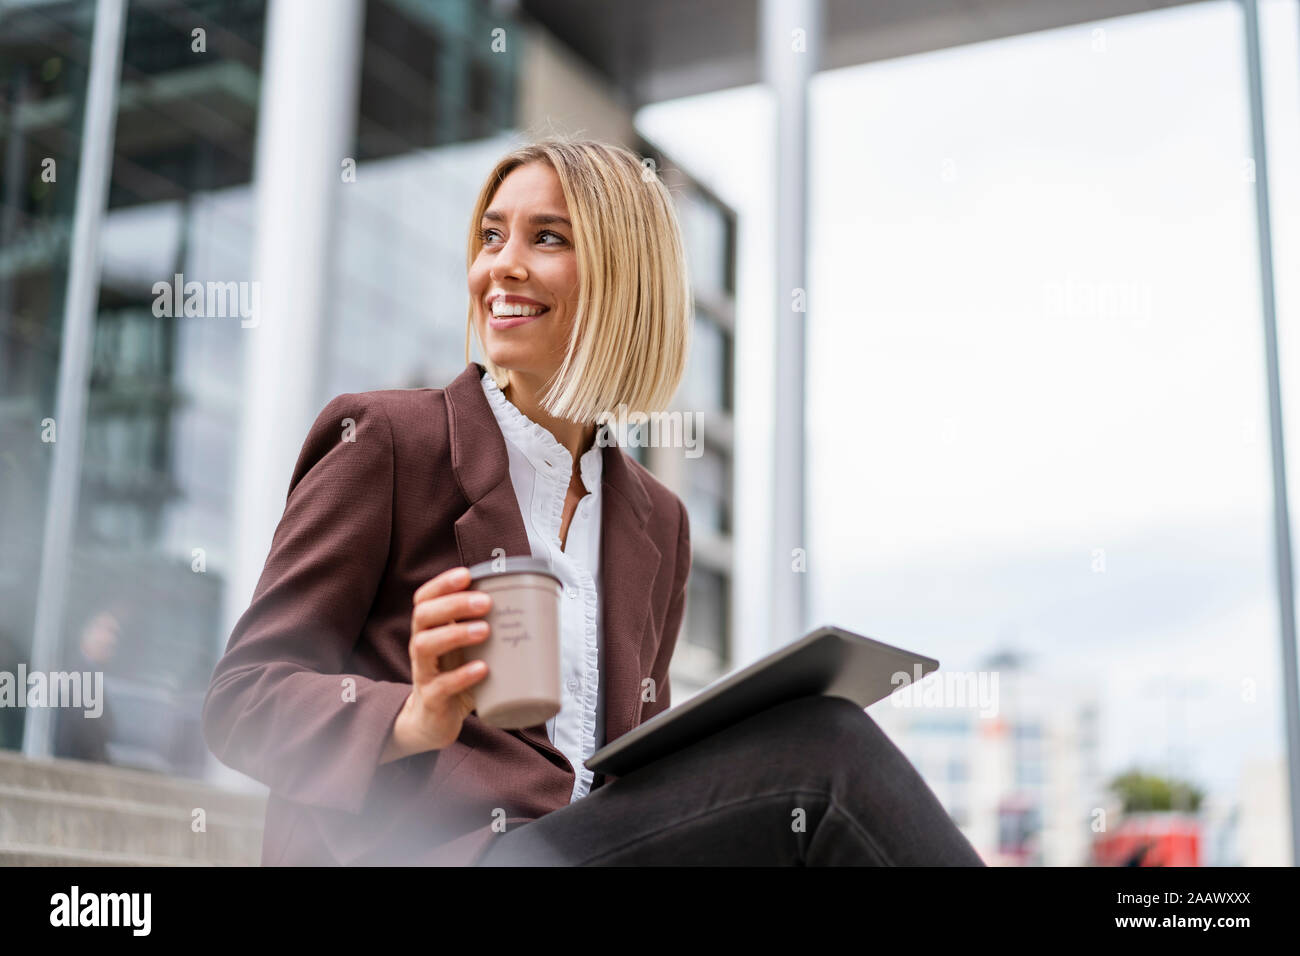 Smiling young businesswoman with tablet and coffee to go in the city Stock Photo